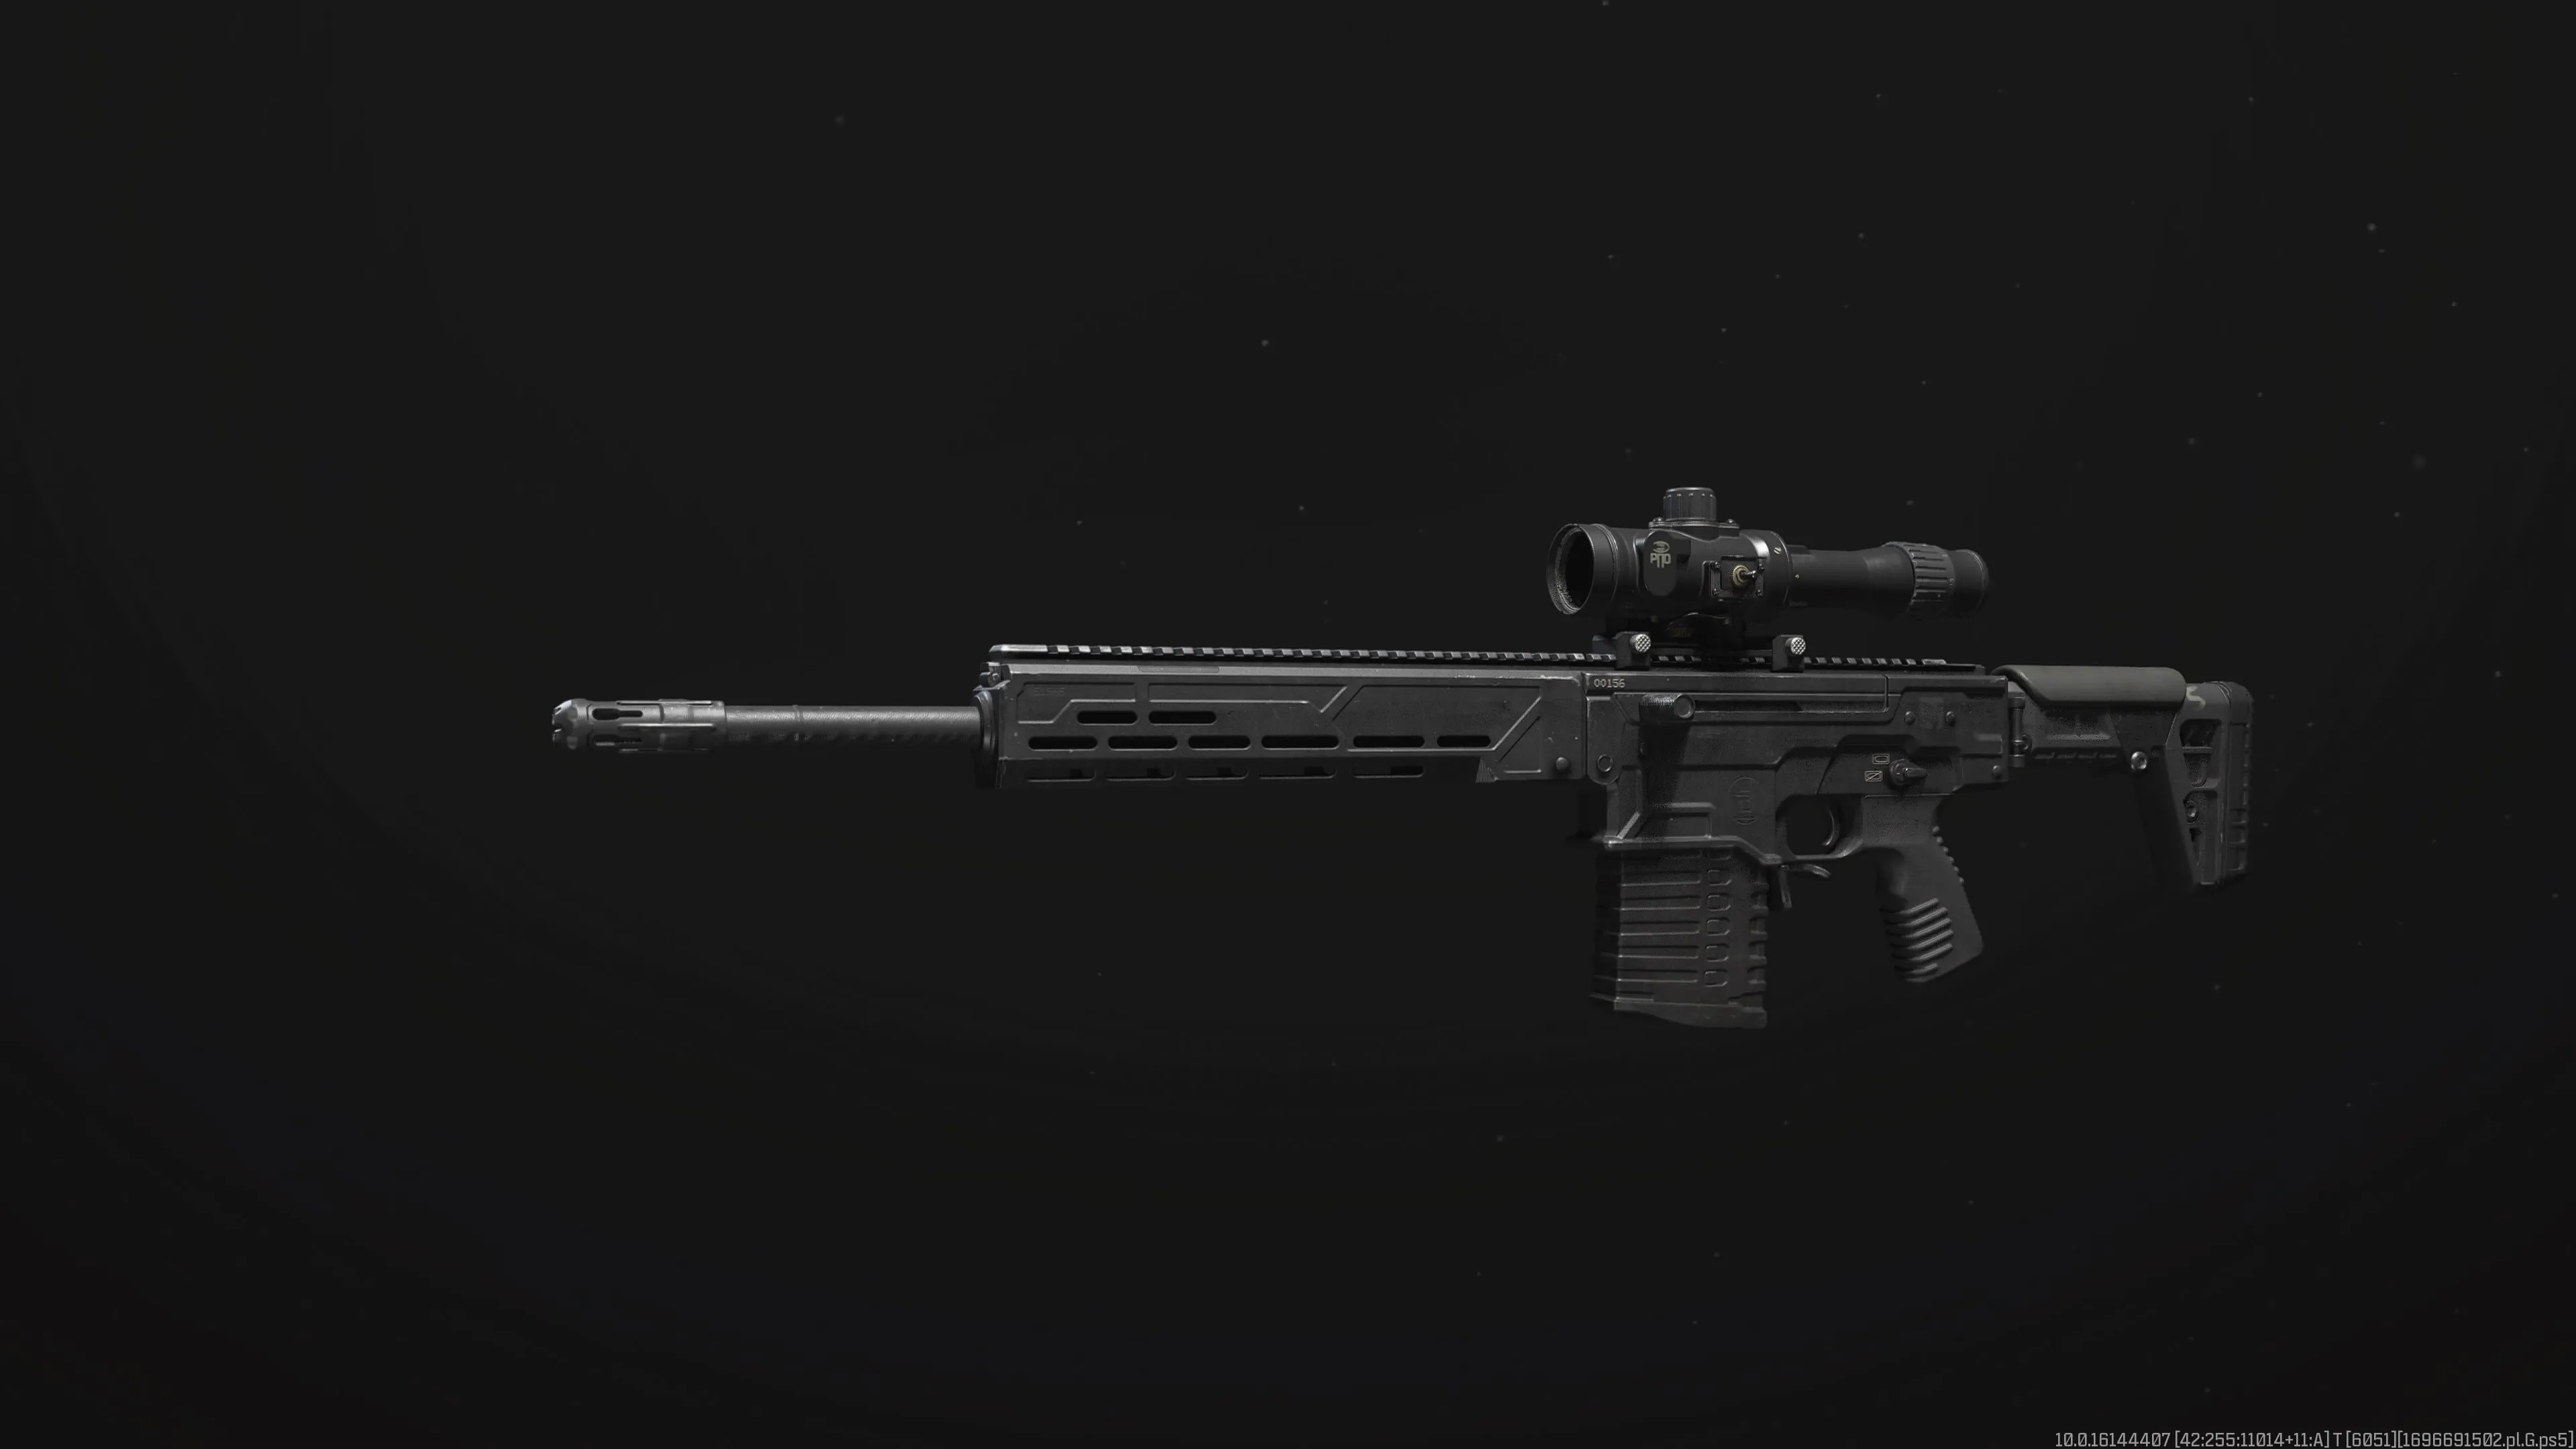 A screenshot of the KV Inhibitor sniper rifle in MW3.